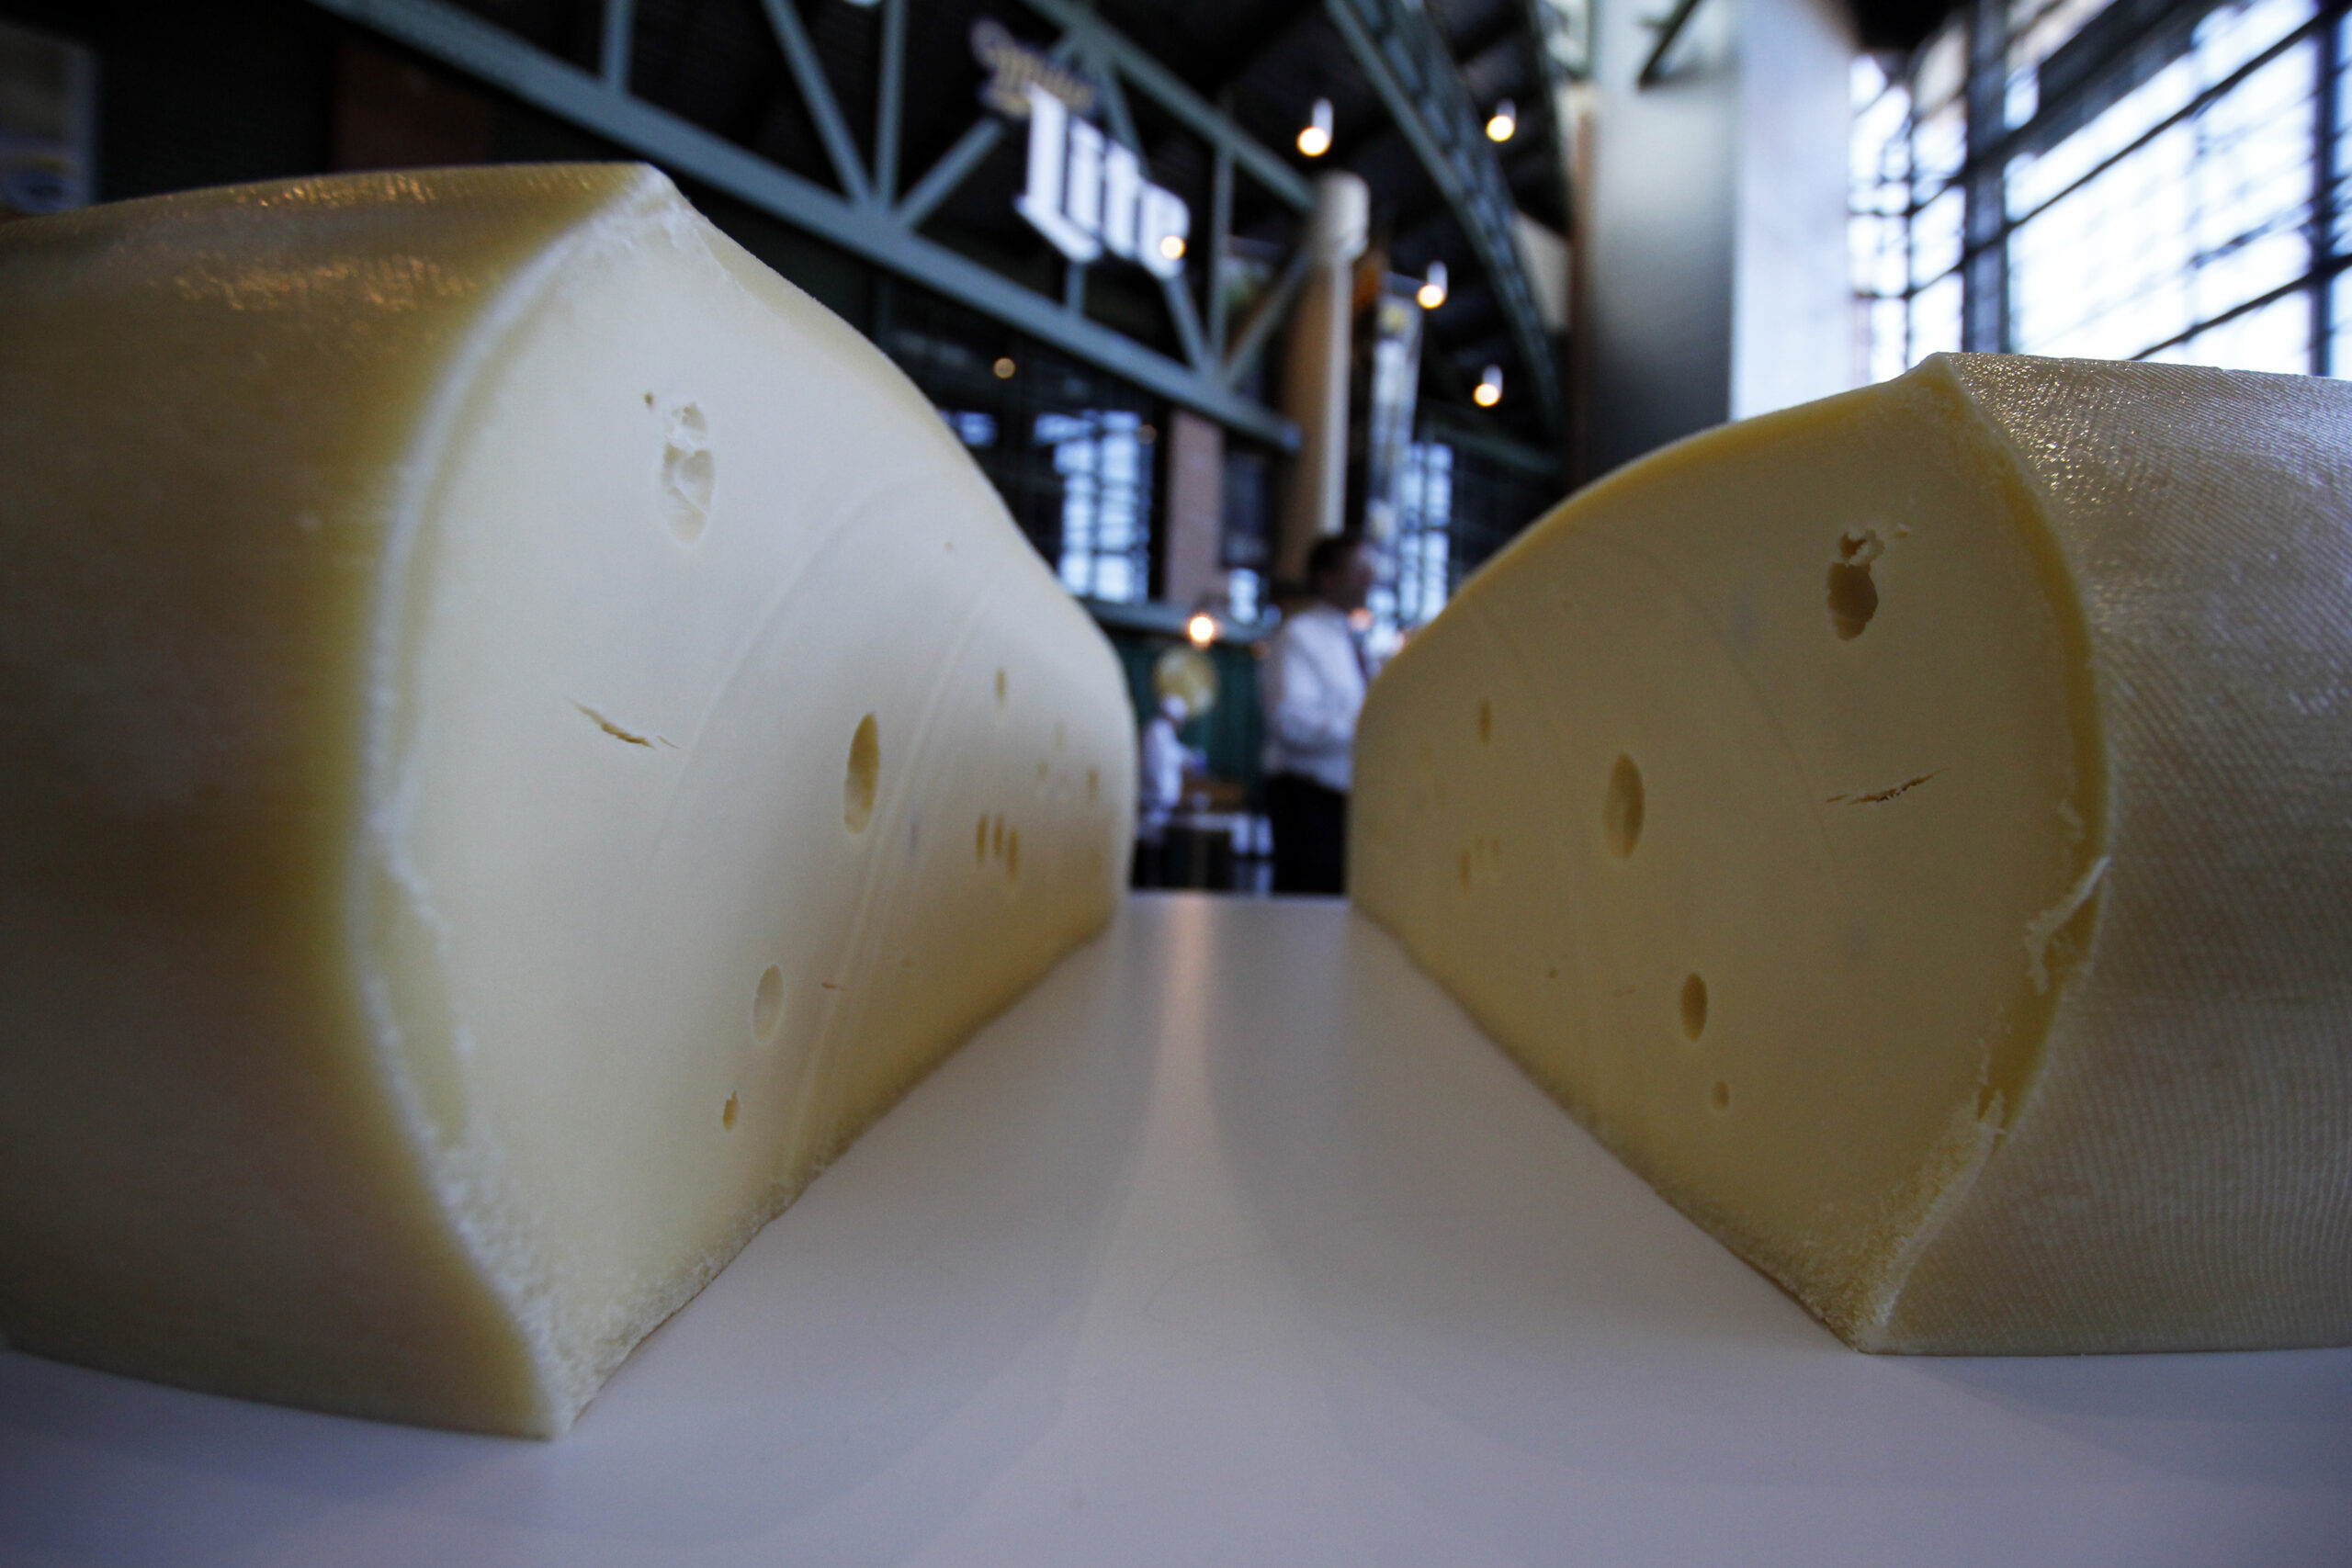 Wisconsin, International Cheese Makers Compete As Consumer Demand For Specialty Dairy Grows